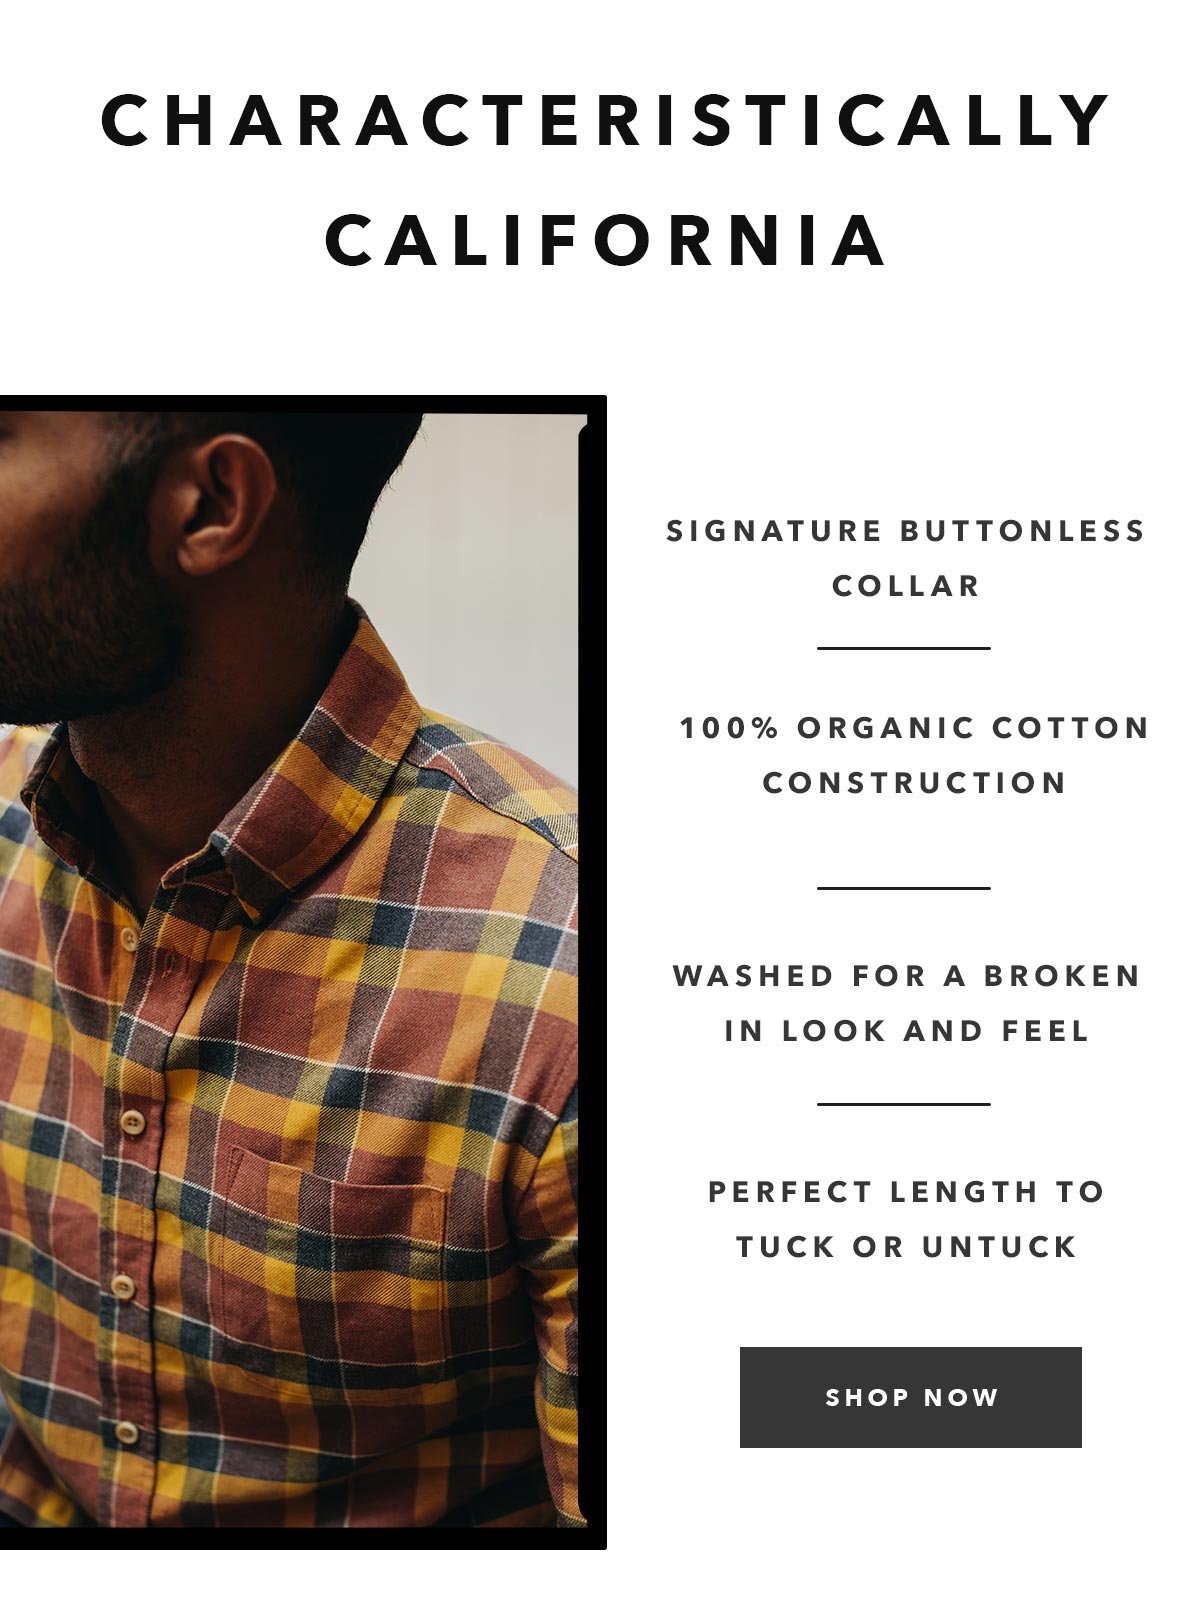 Characteristically California: signature buttonless collar, 100% organic cotton construction, washed for a broken in look and feel, perfect length to tuck or untuck